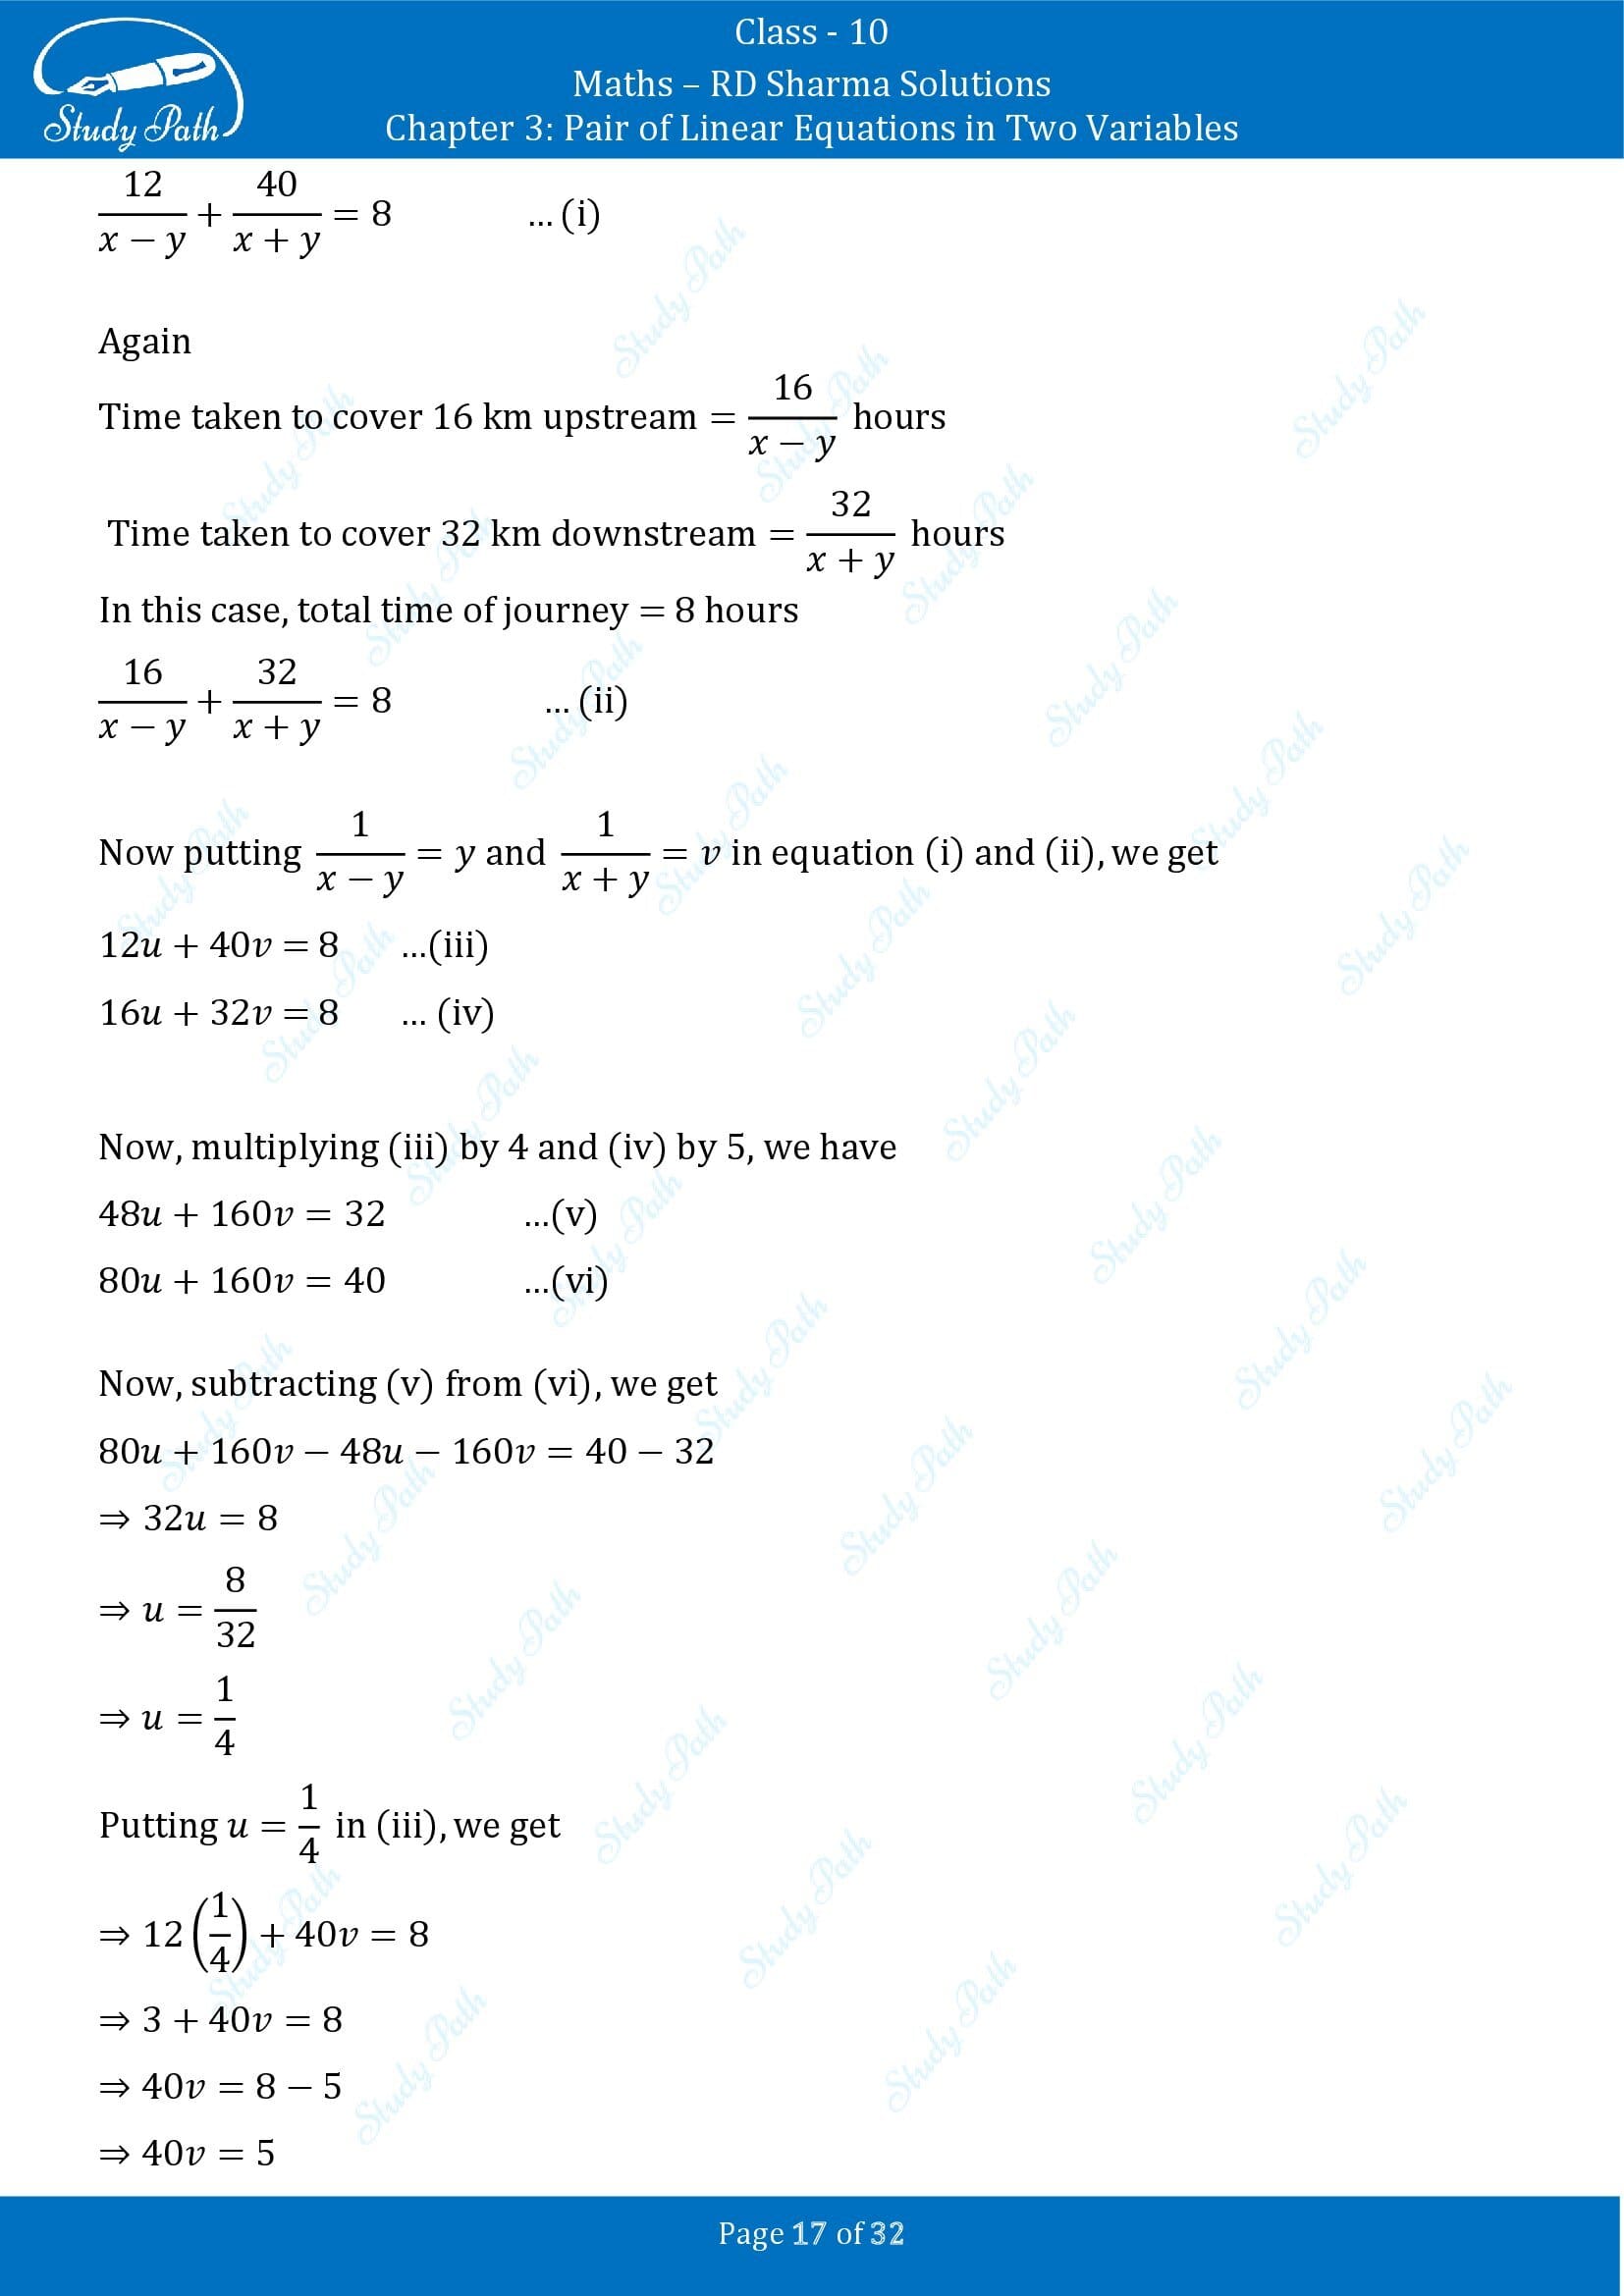 RD Sharma Solutions Class 10 Chapter 3 Pair of Linear Equations in Two Variables Exercise 3.10 00017